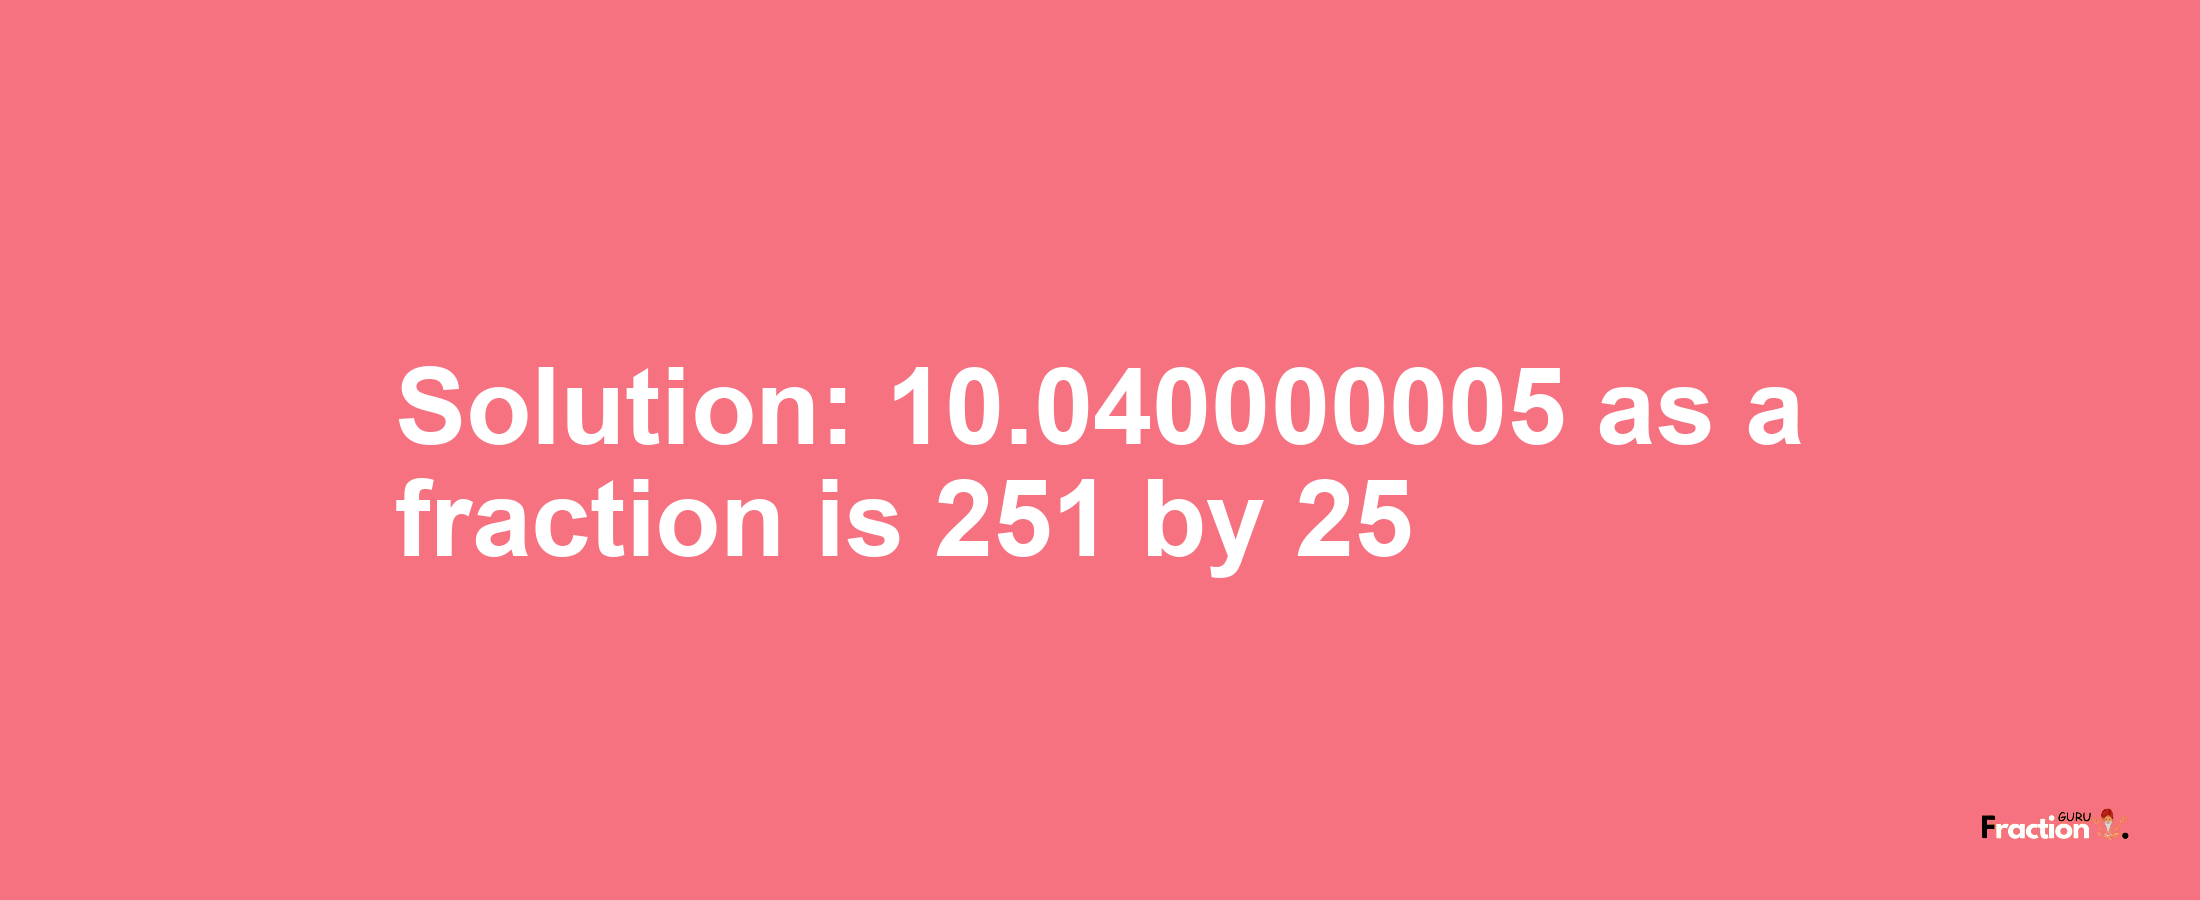 Solution:10.040000005 as a fraction is 251/25